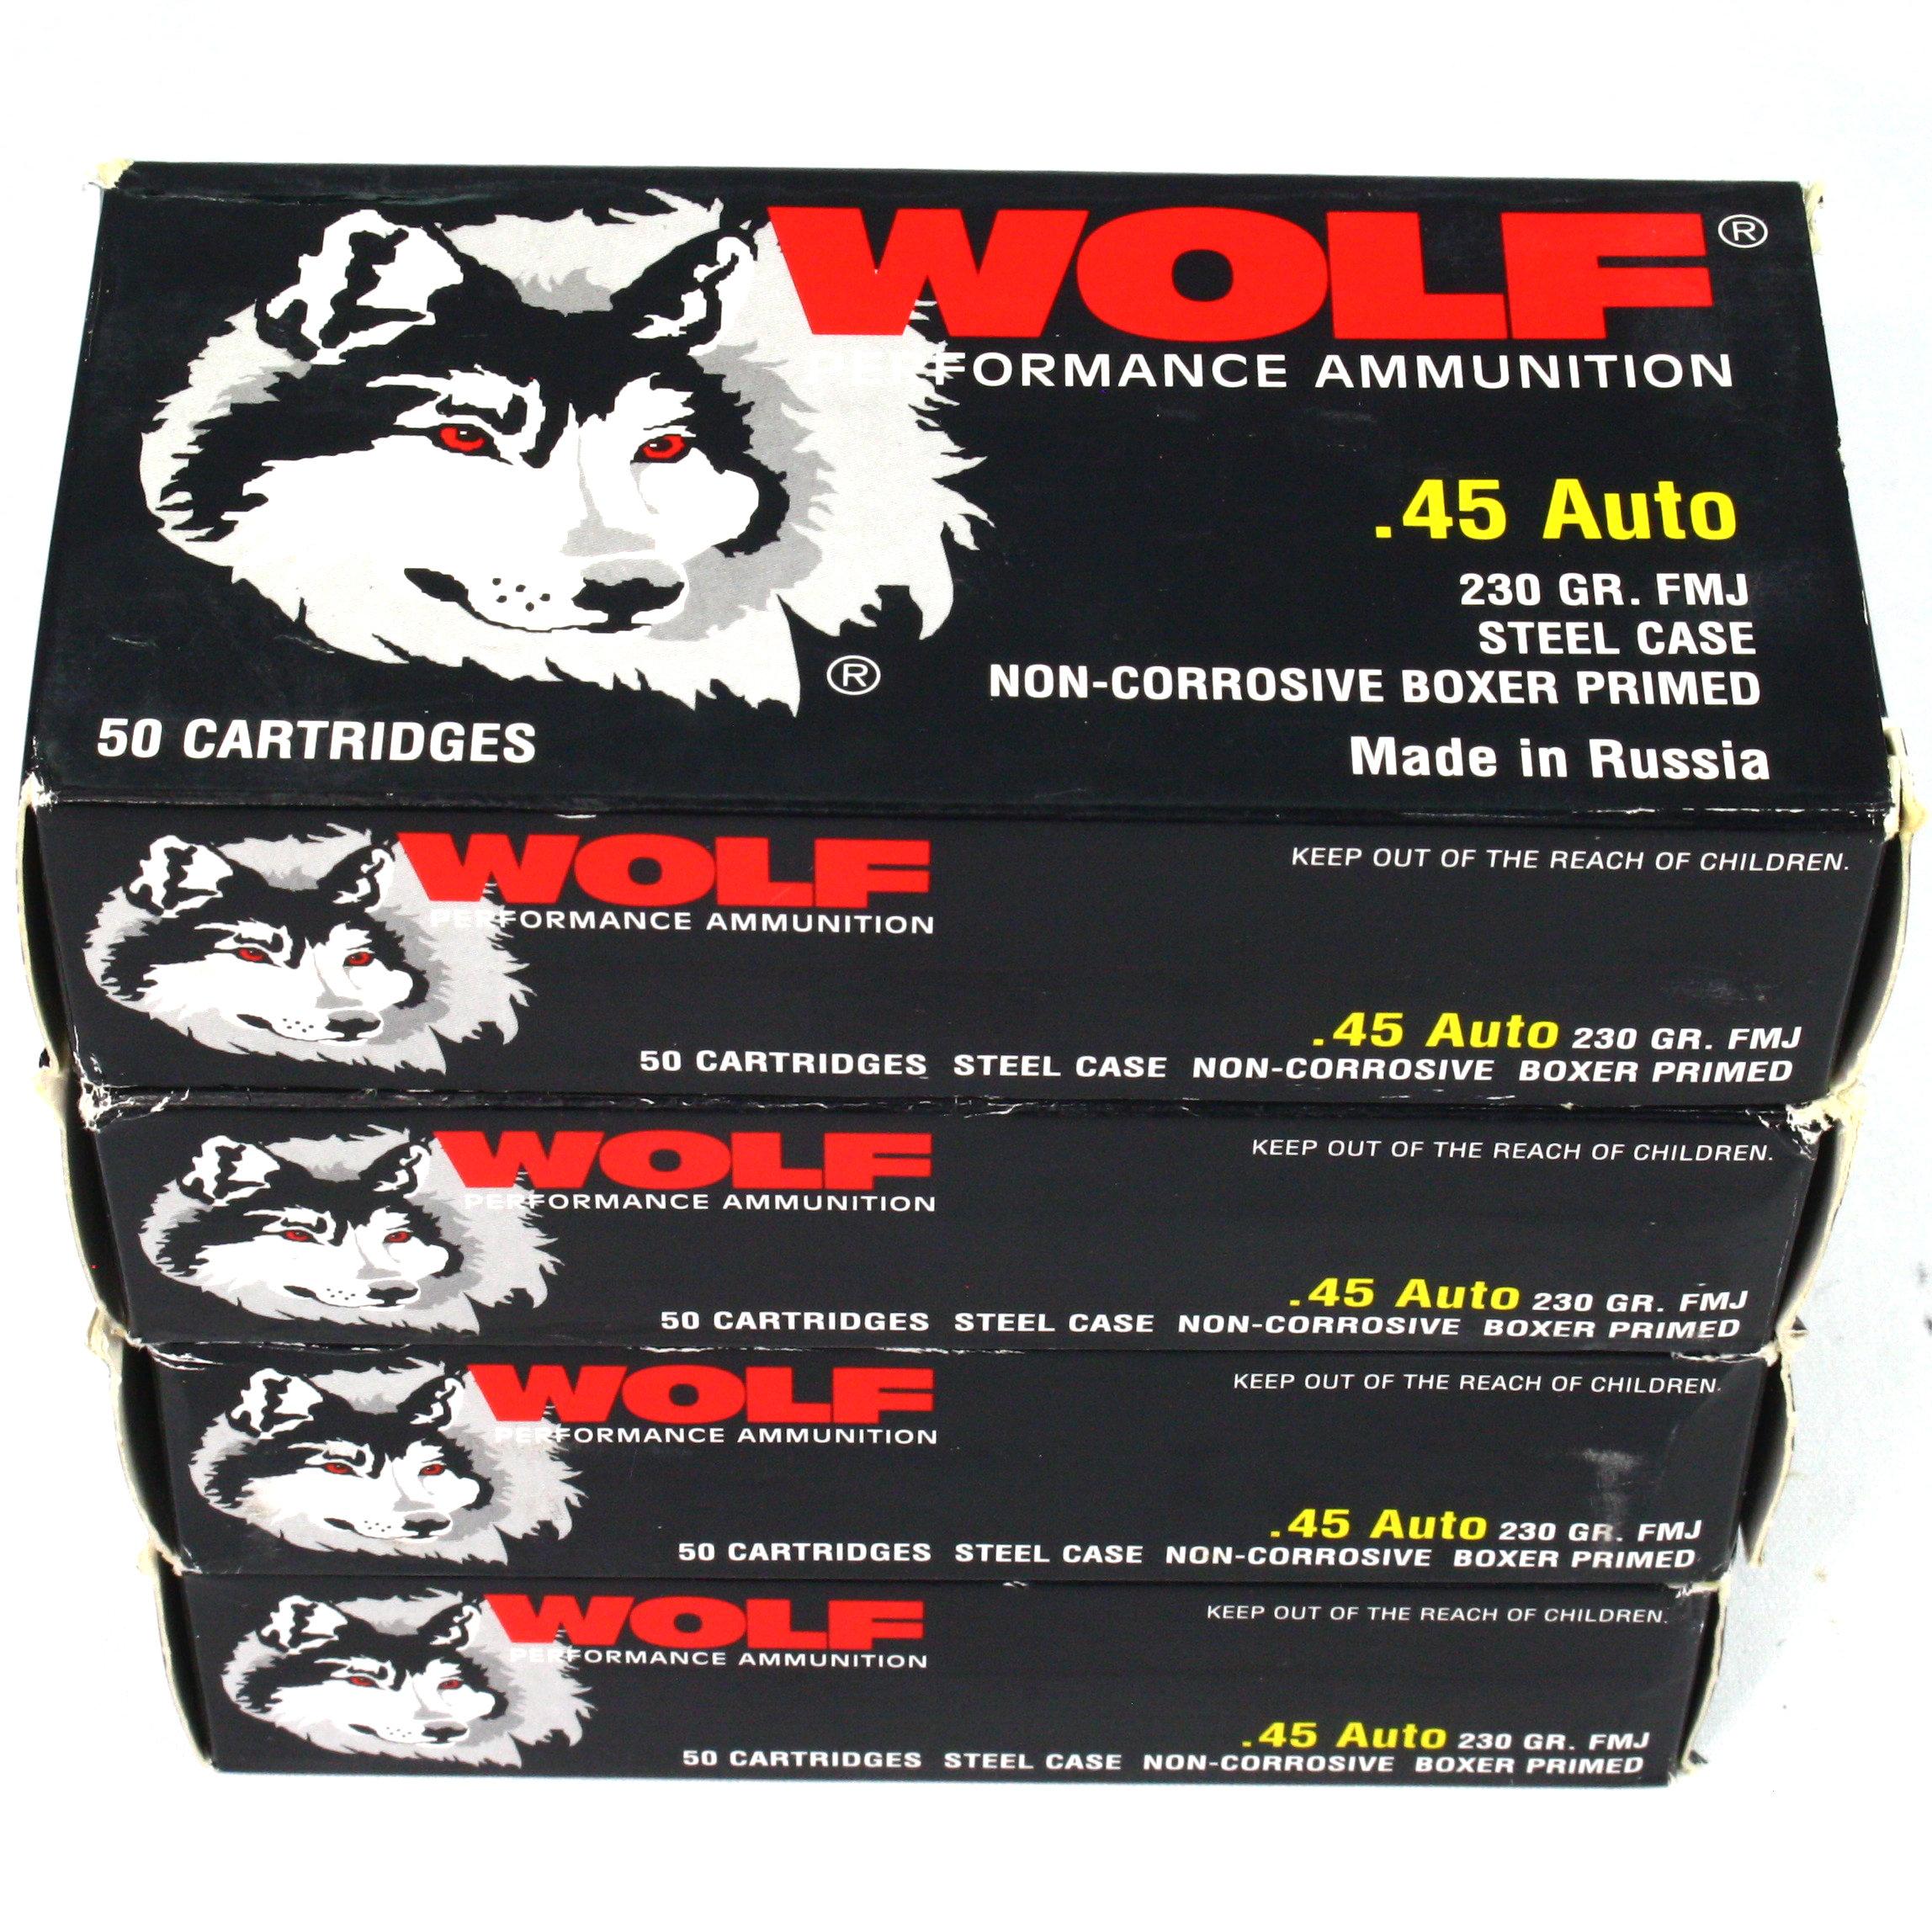 Lot of 200 rounds of Wolf .45 acp FMJ steel cased pistol ammo